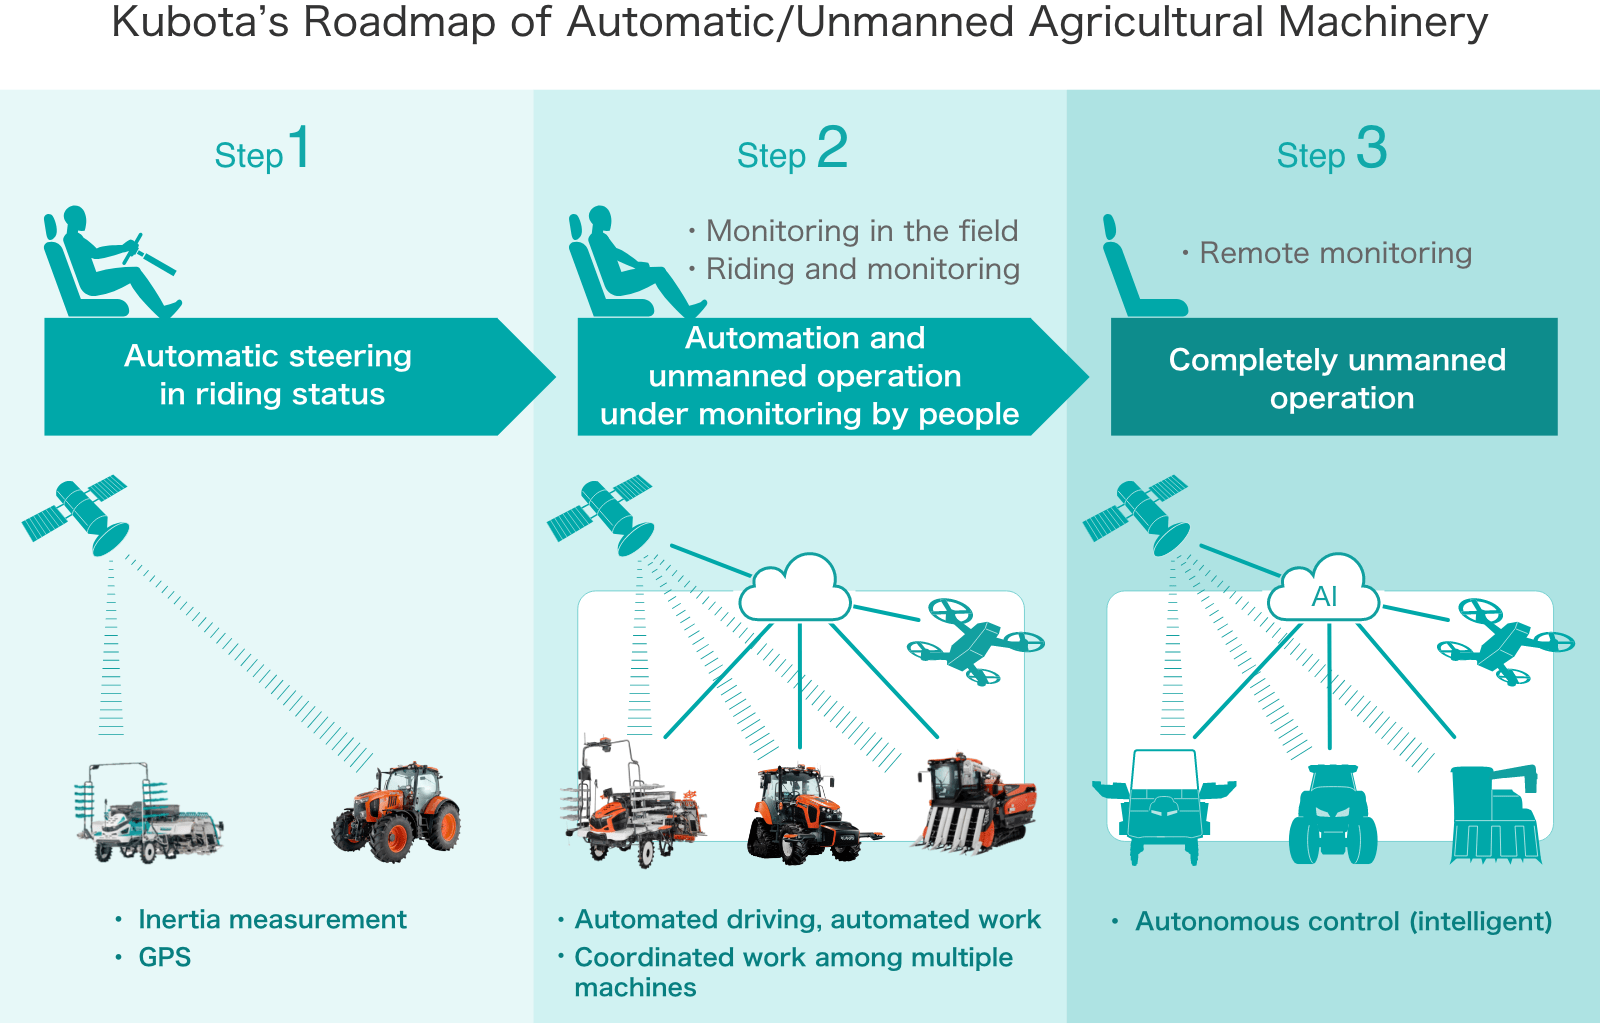 Kubota's Roadmap of Automatic/Unmanned Agricultural Machinery